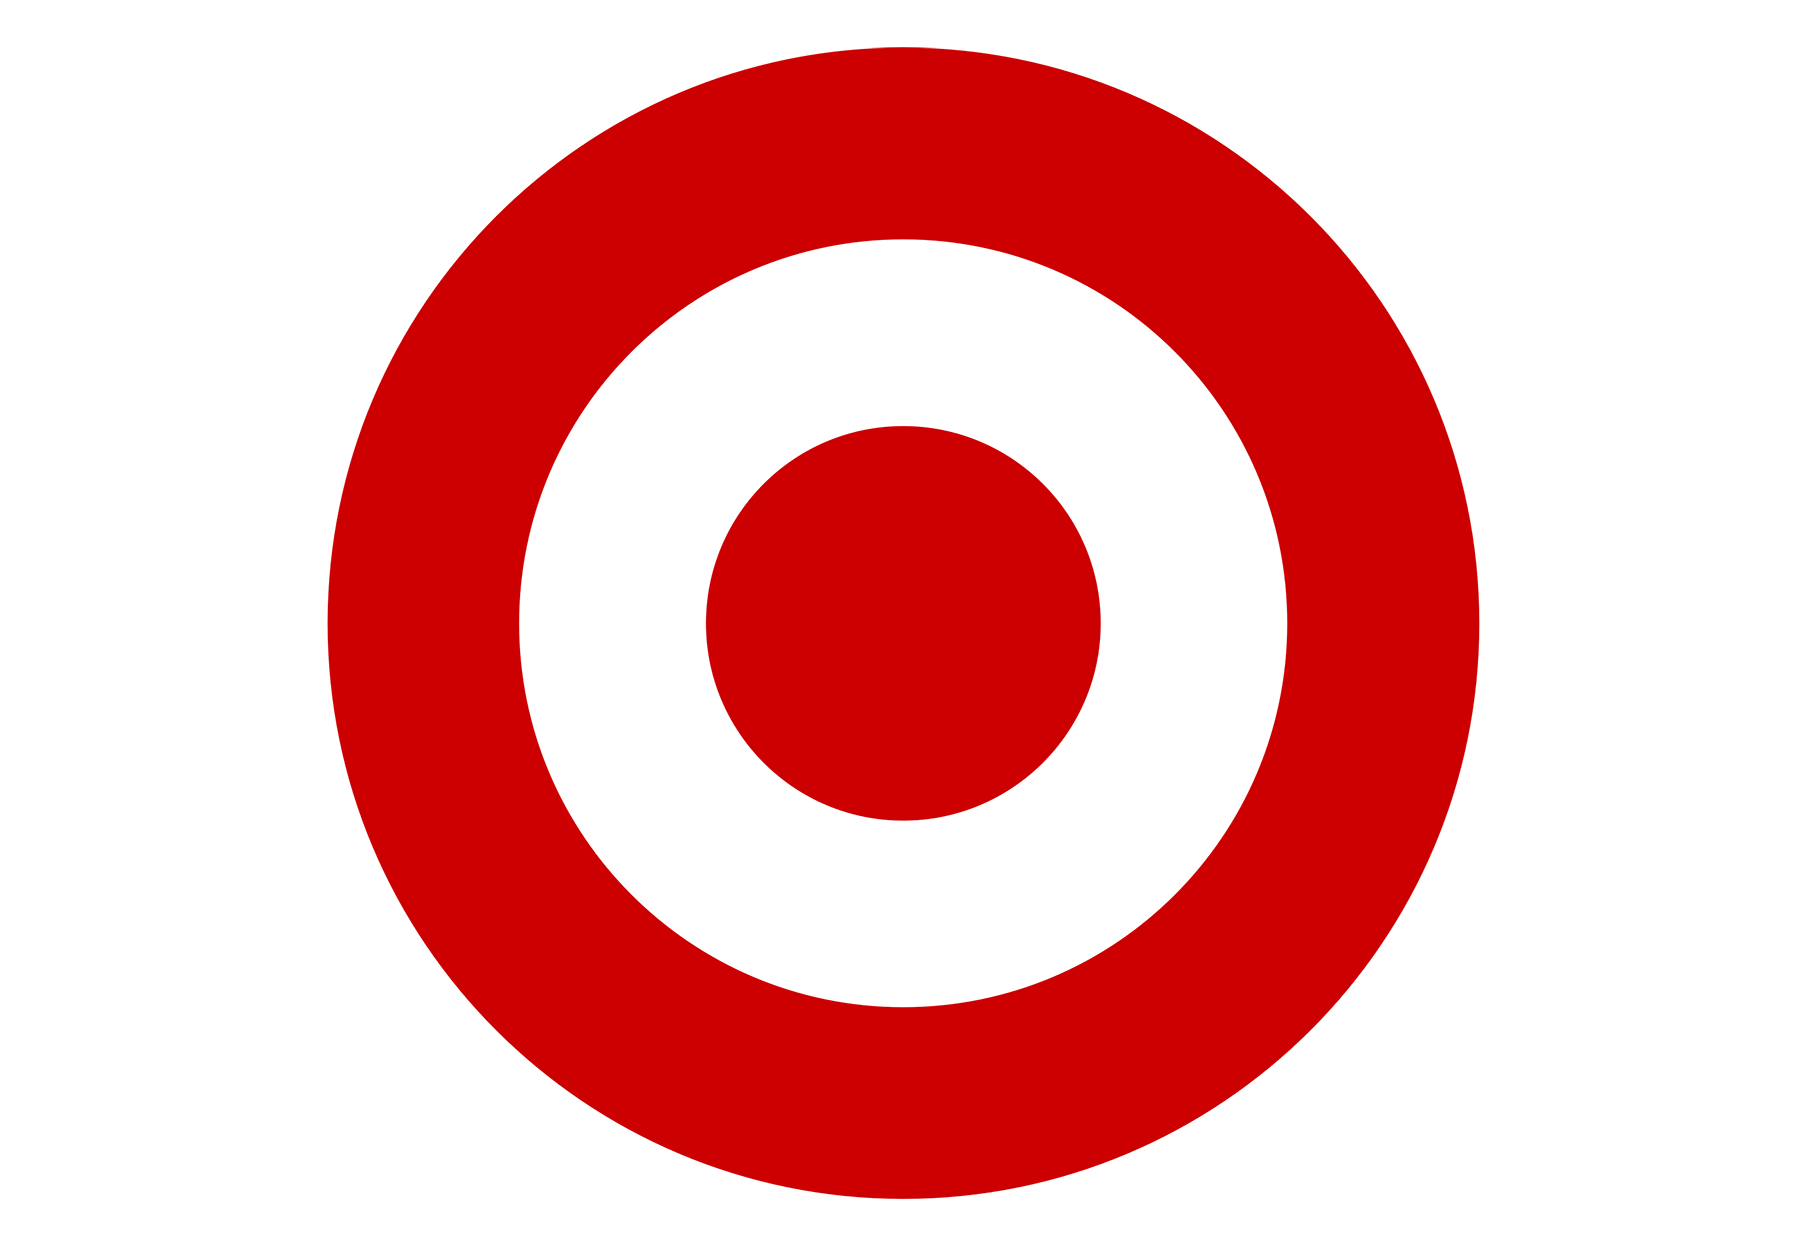 Red with White Circle Logo - Target Logo, Target Symbol, Meaning, History and Evolution